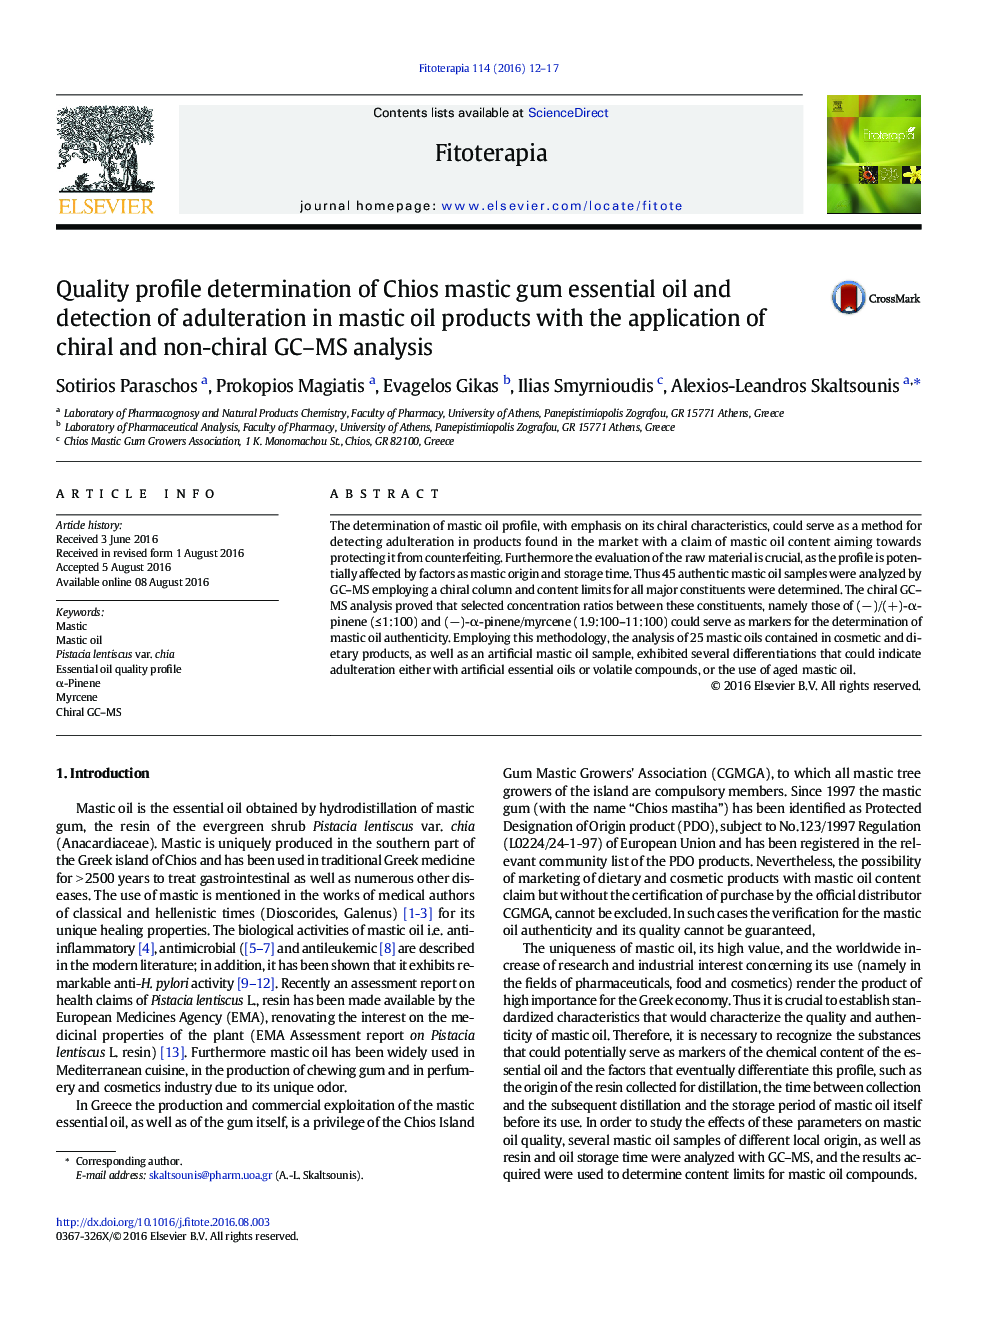 Quality profile determination of Chios mastic gum essential oil and detection of adulteration in mastic oil products with the application of chiral and non-chiral GC–MS analysis